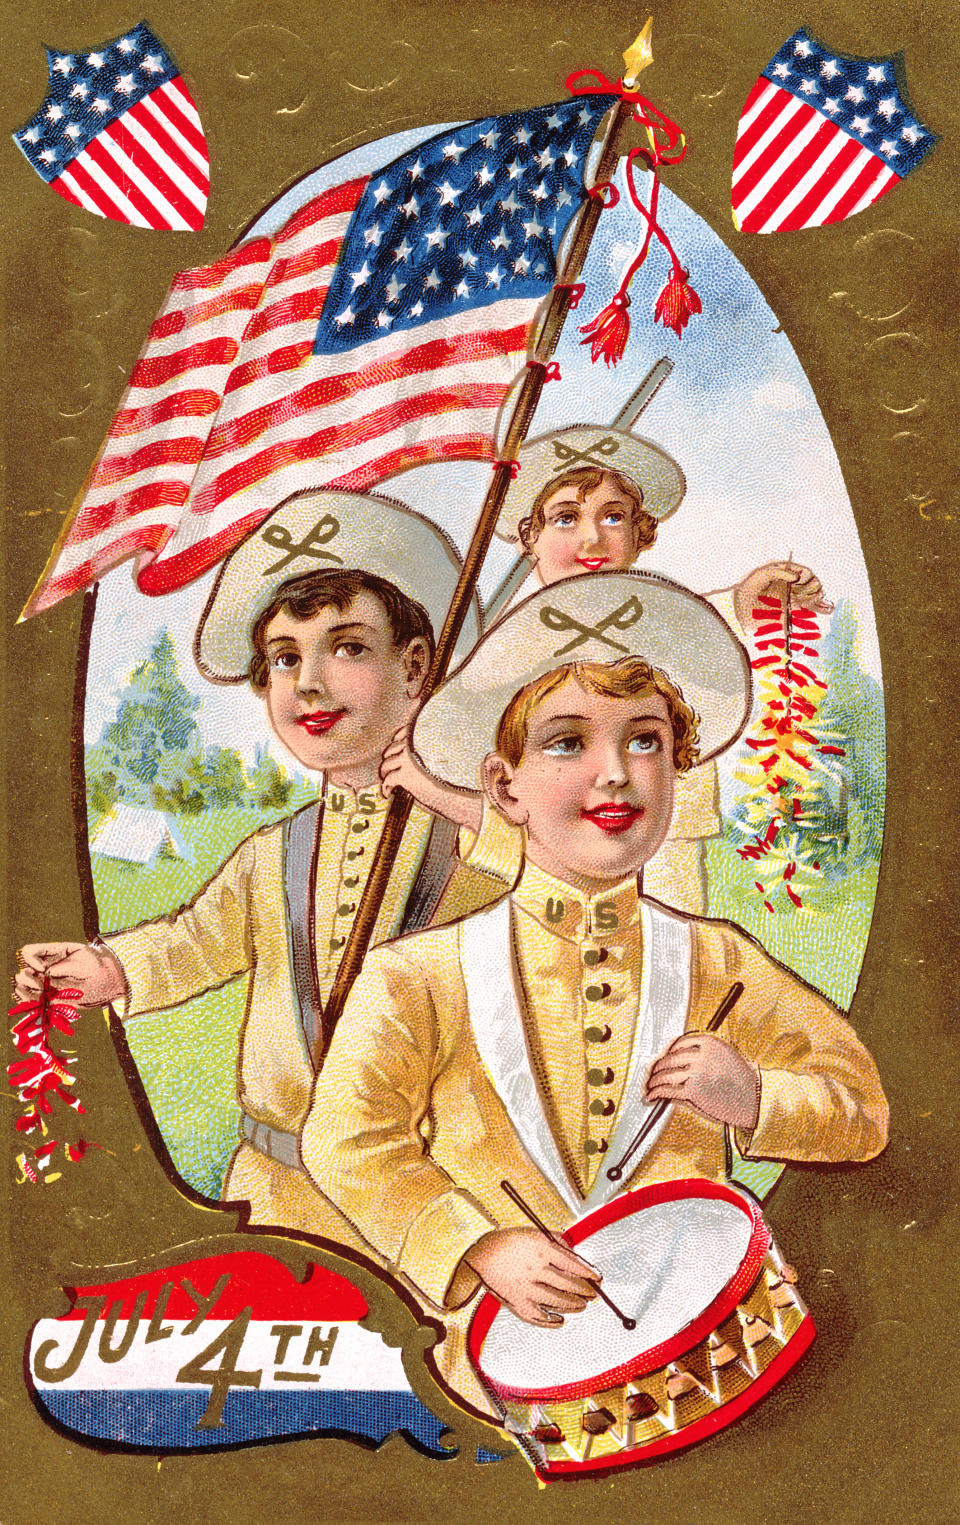 <p>July Fourth postcard with spirit of ’76 theme. (Photo: K.J. Historical/Corbis via Getty Images) </p>